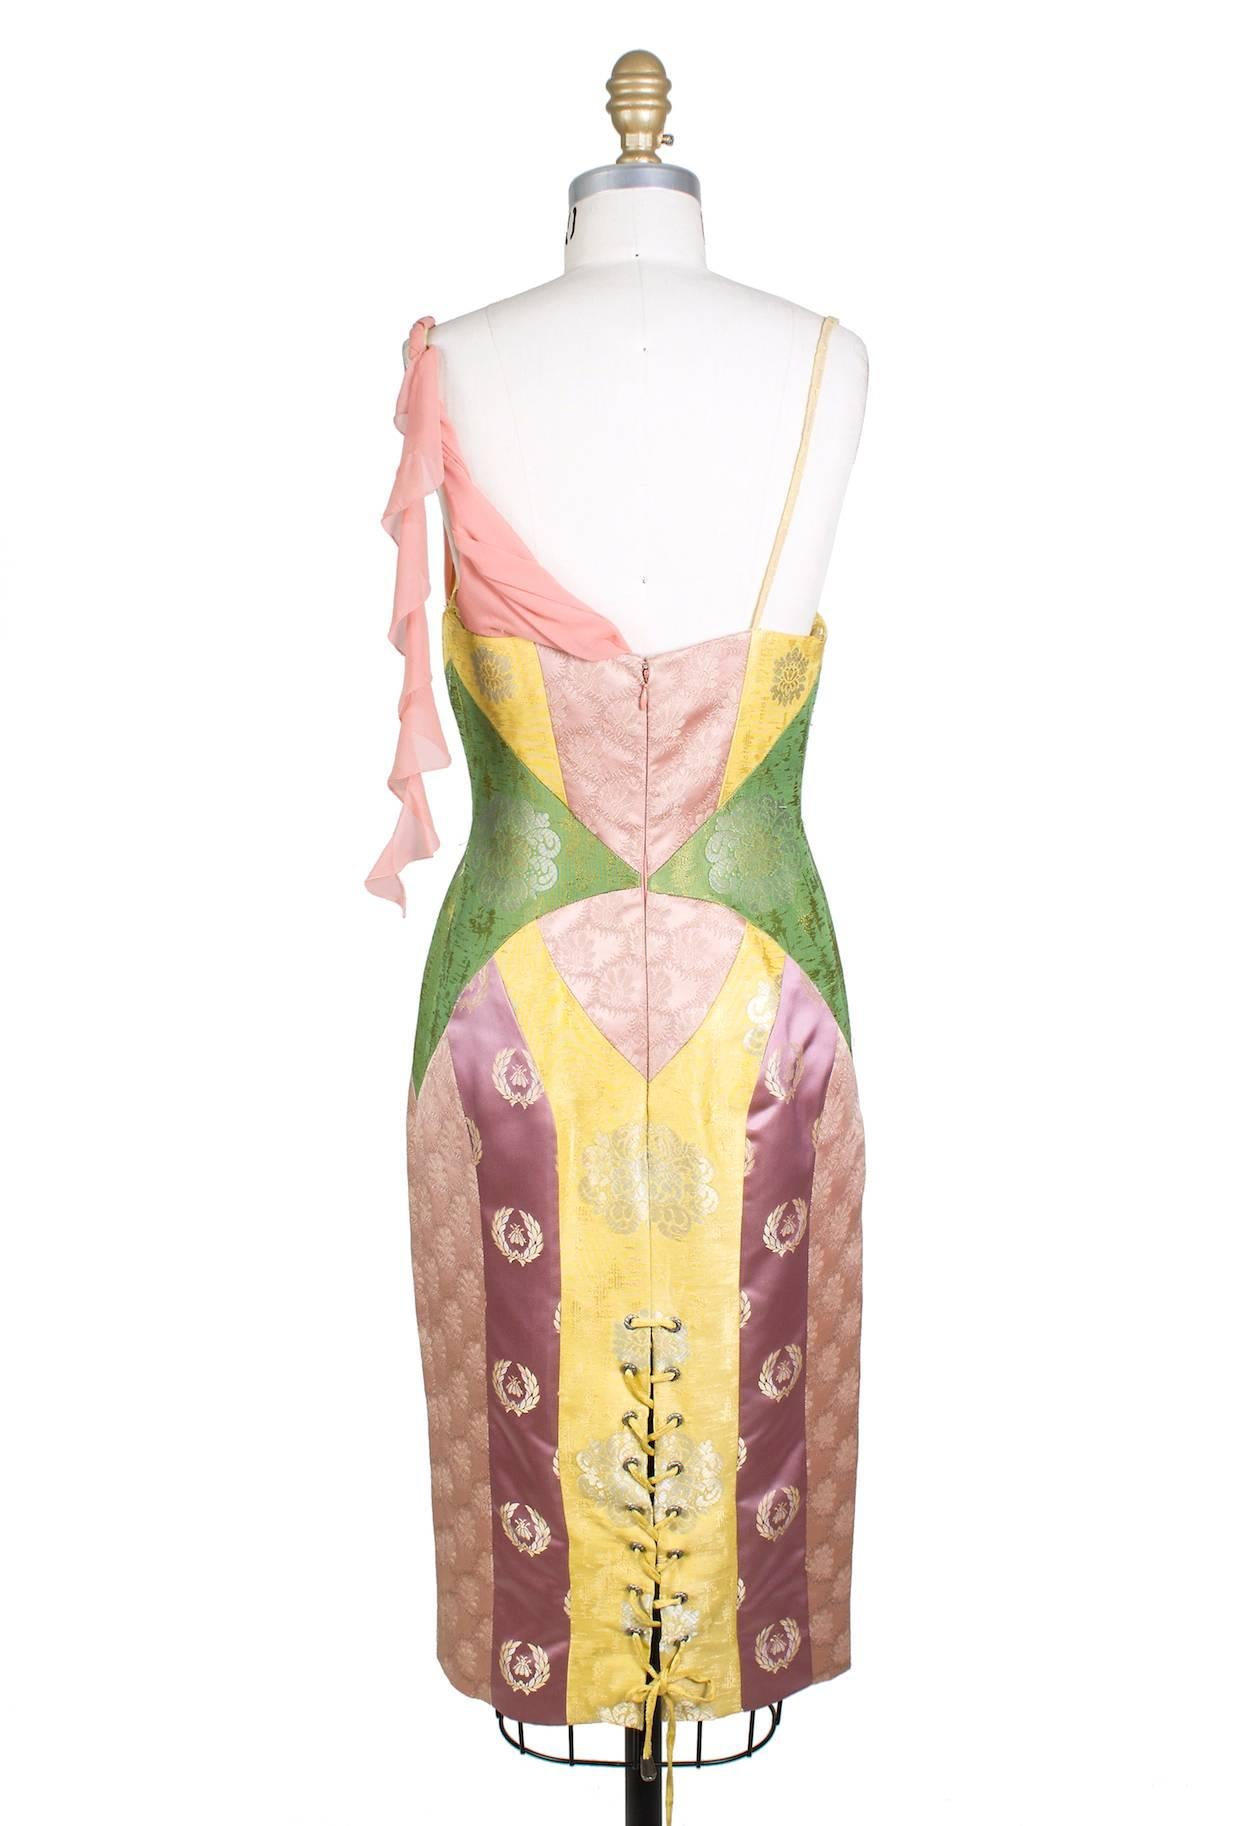 This is a sheath dress from Versace circa 1980s/1990s. It features pastel colored panels of brocade fabric and has lace and chiffon draped details around the bust.  The back has a corset lace up slit in back.  